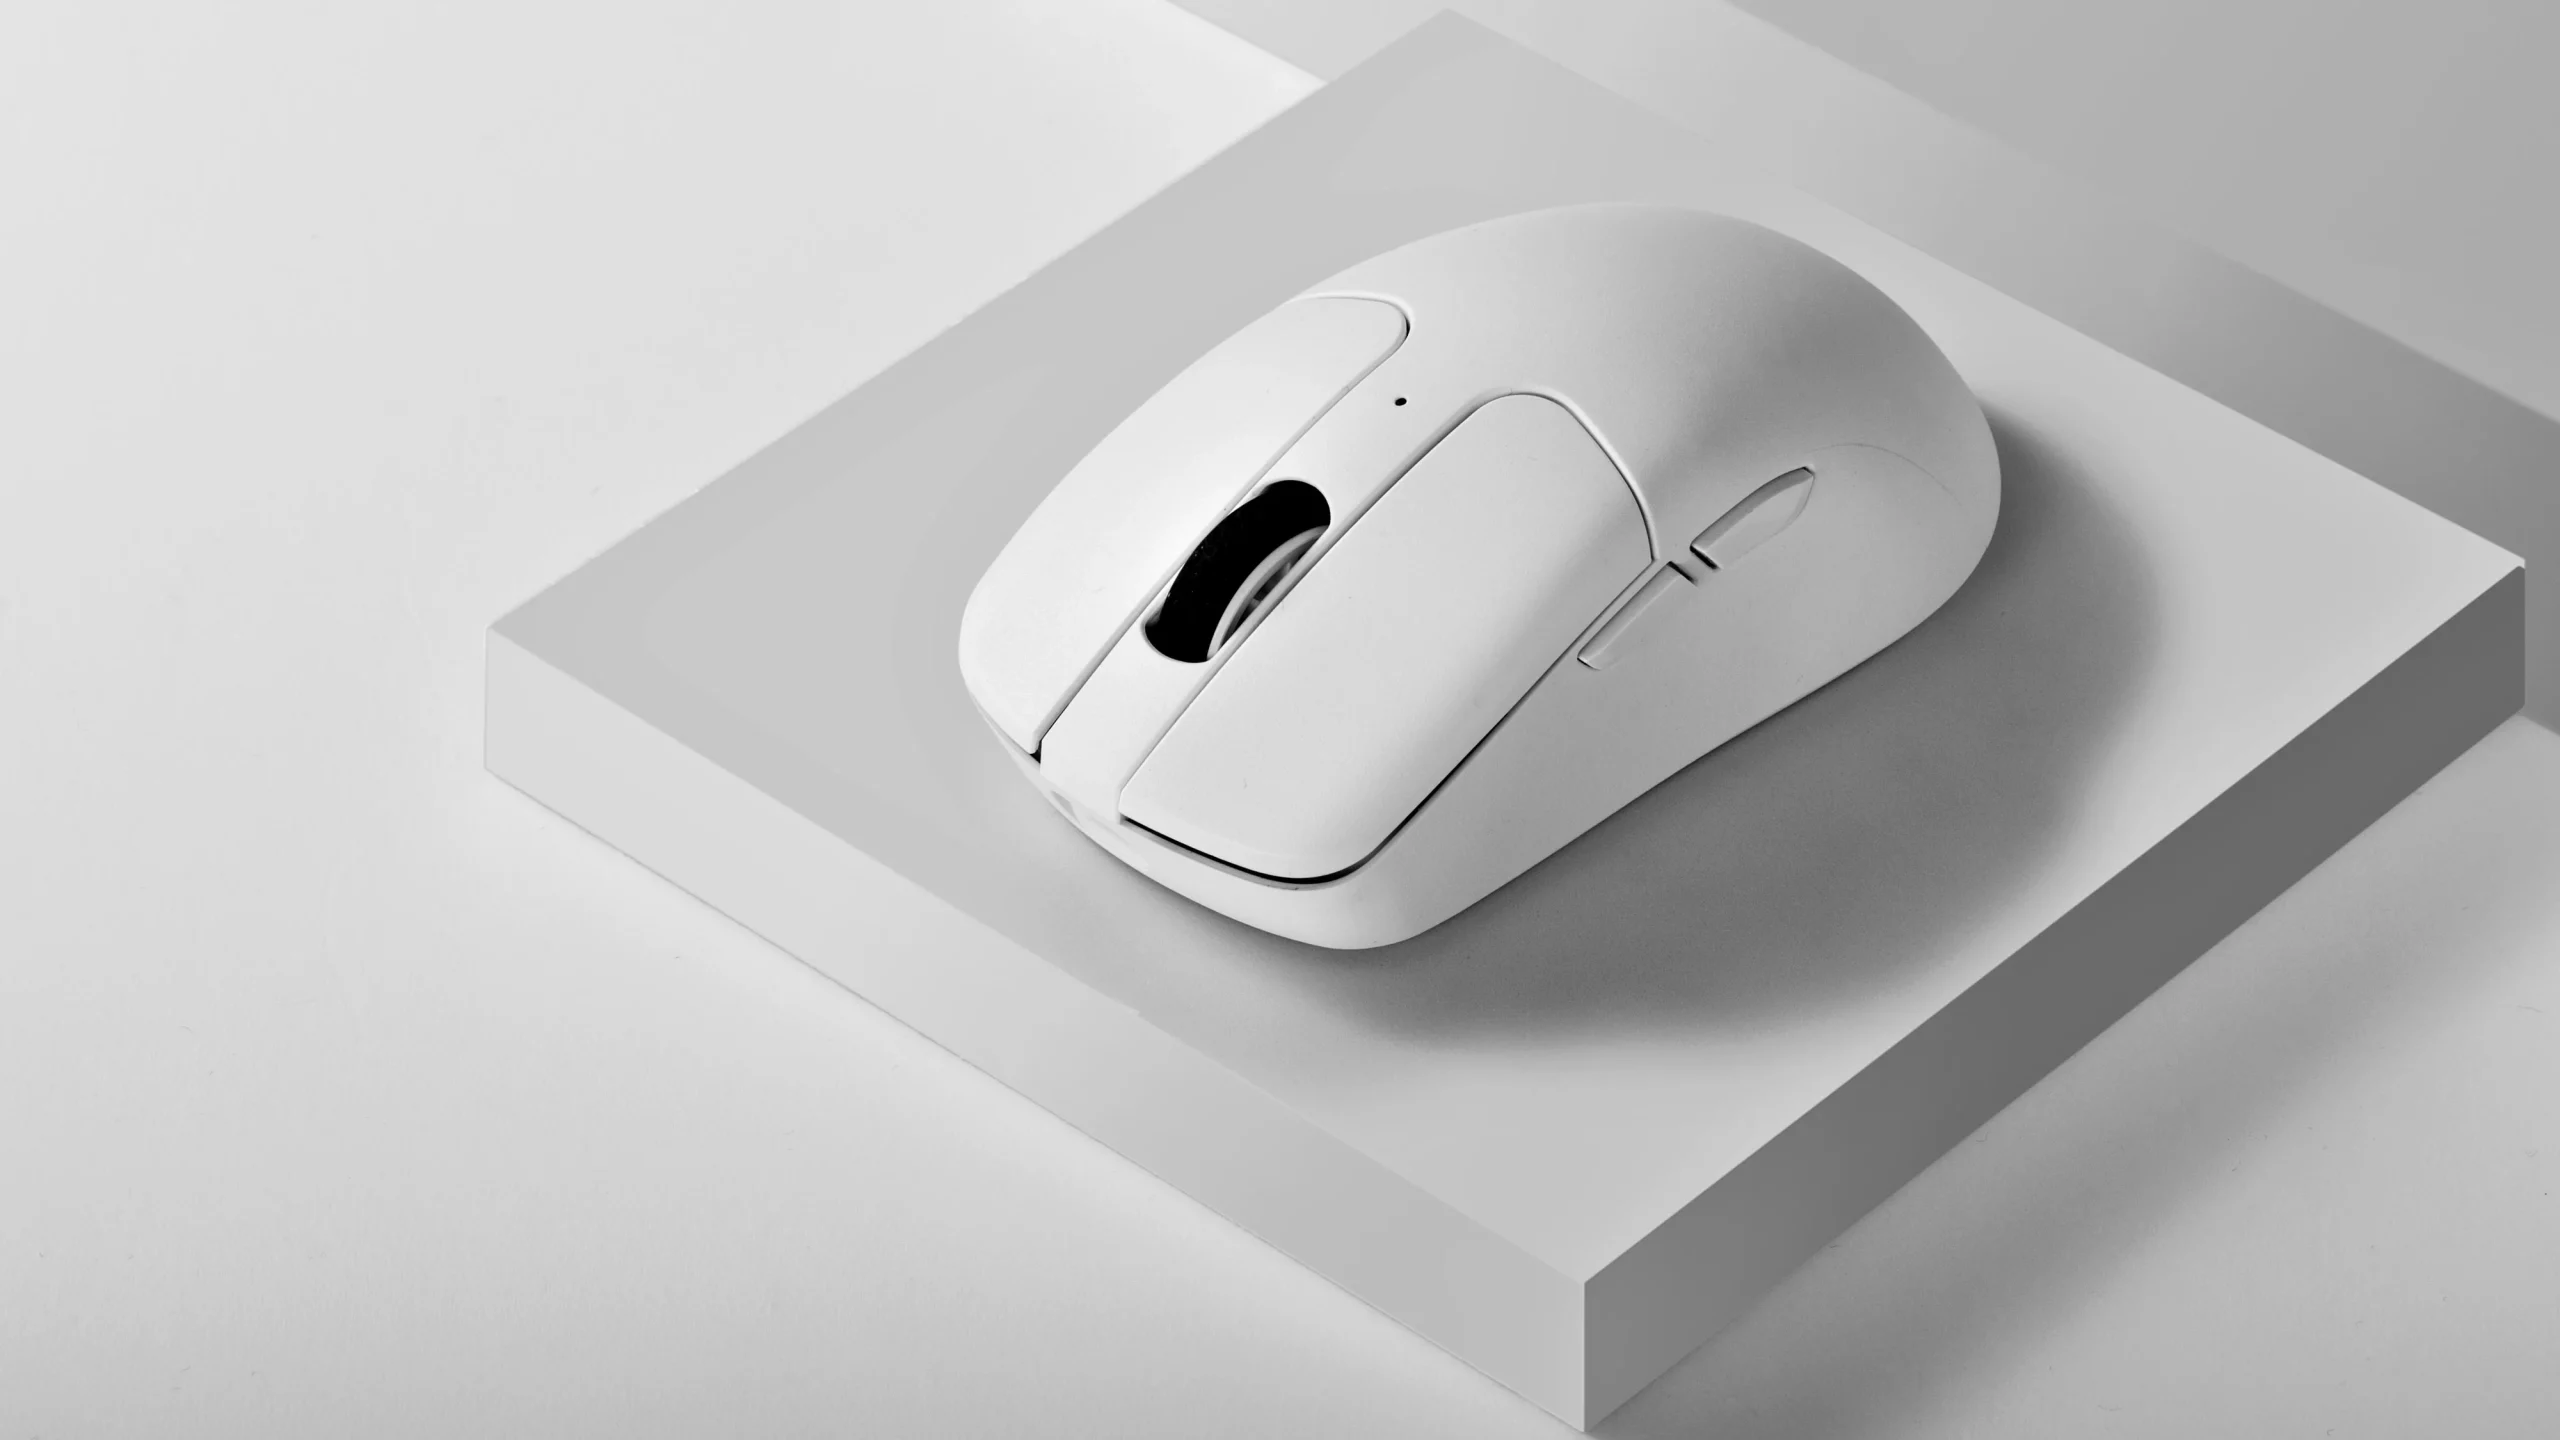 Keychron M2 Mini wireless mouse with lightweight design launched in China  for 228 Yuan ($31) - Gizmochina